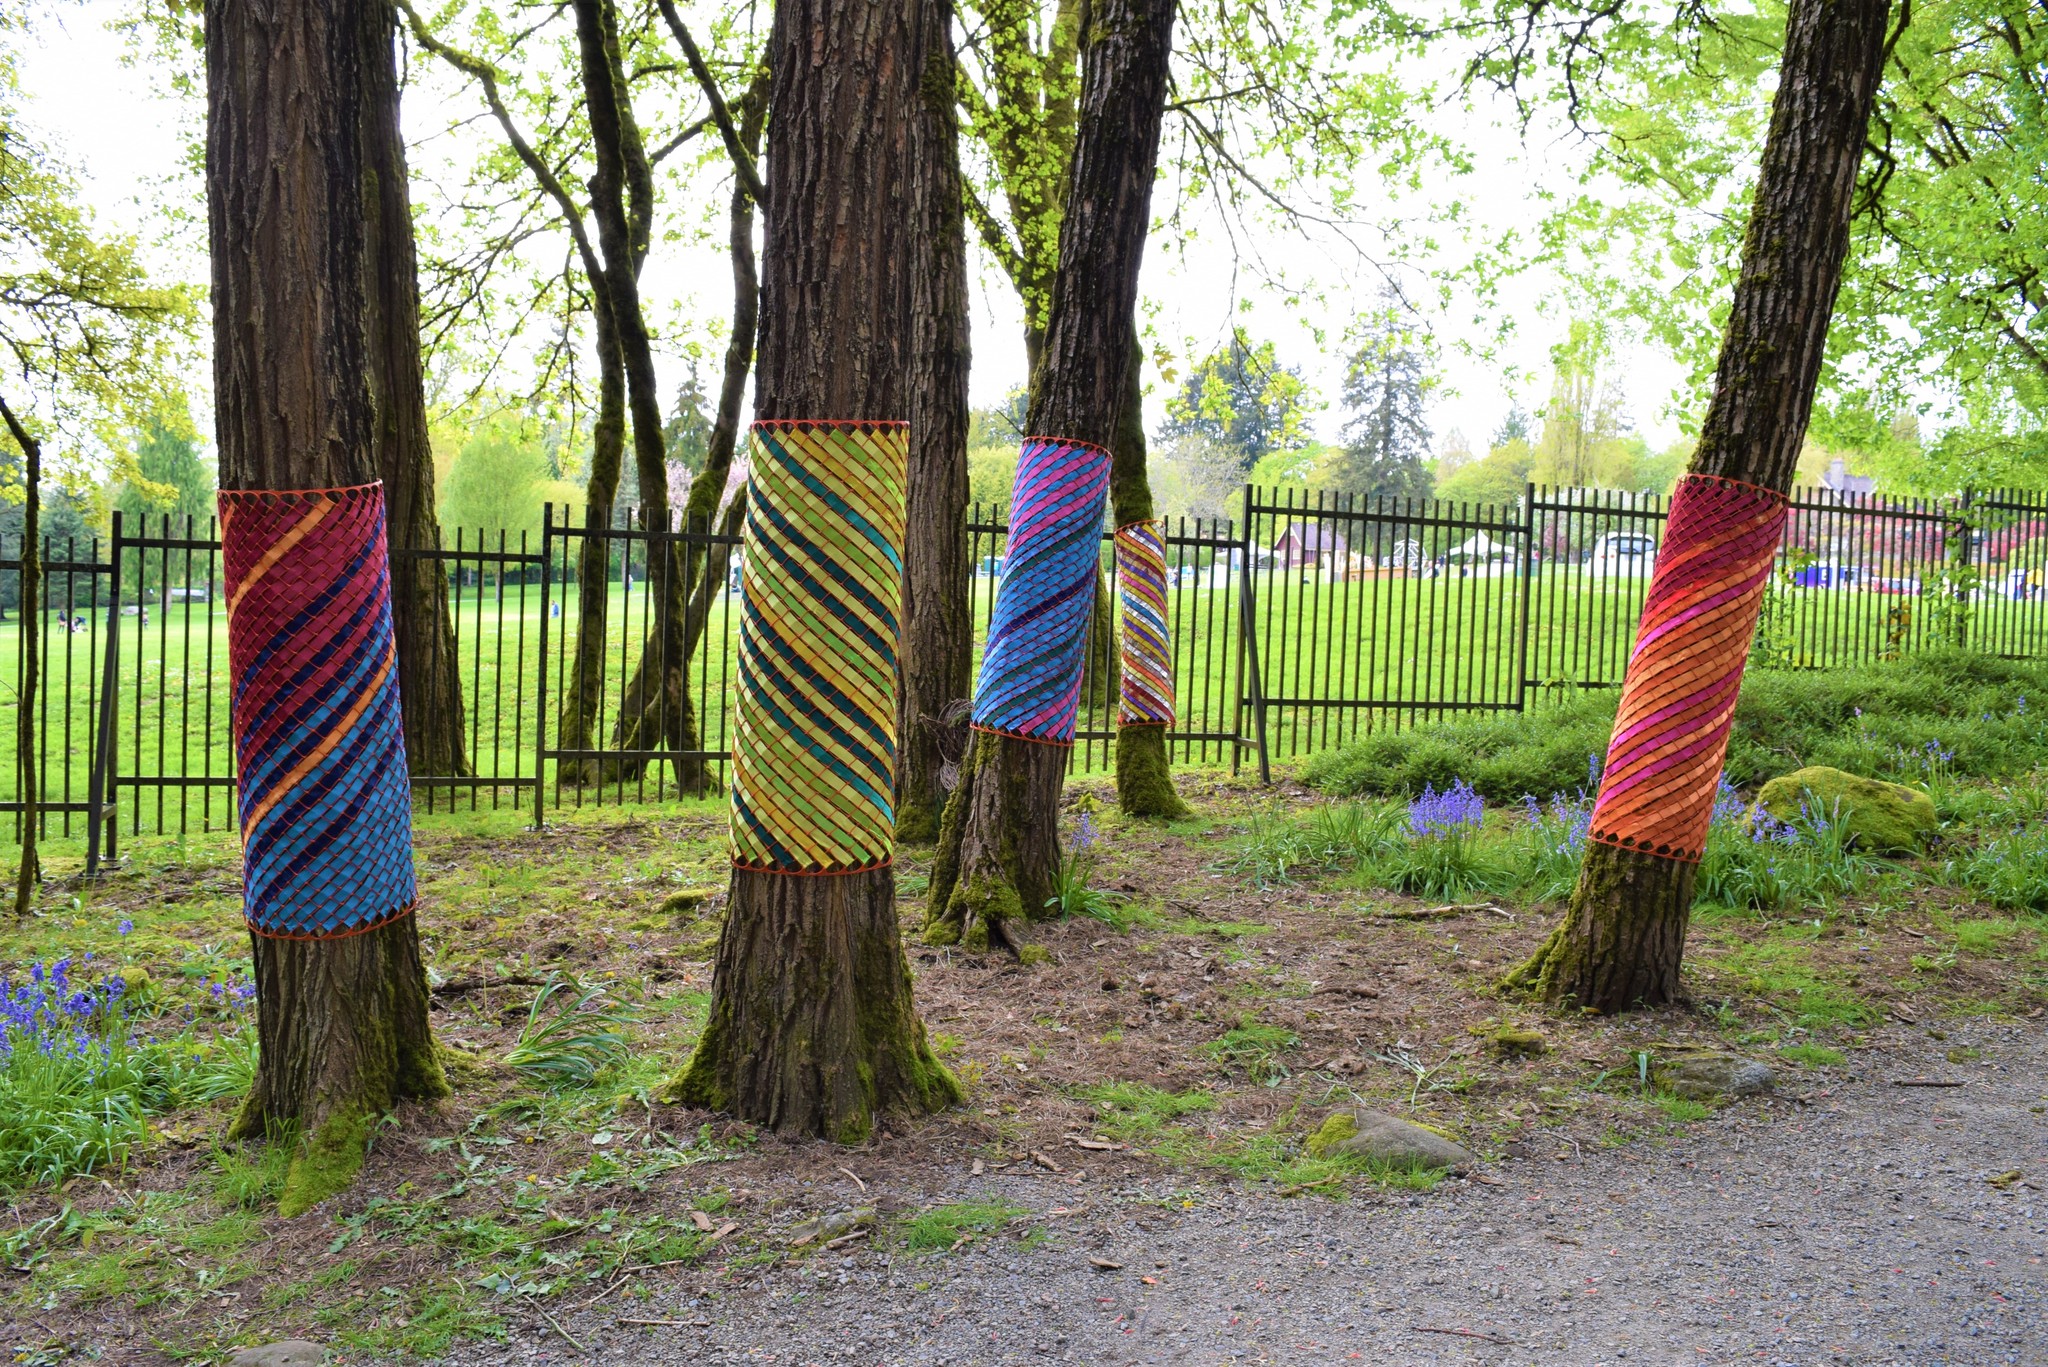 Five trees with colorful wraps around the trunks.